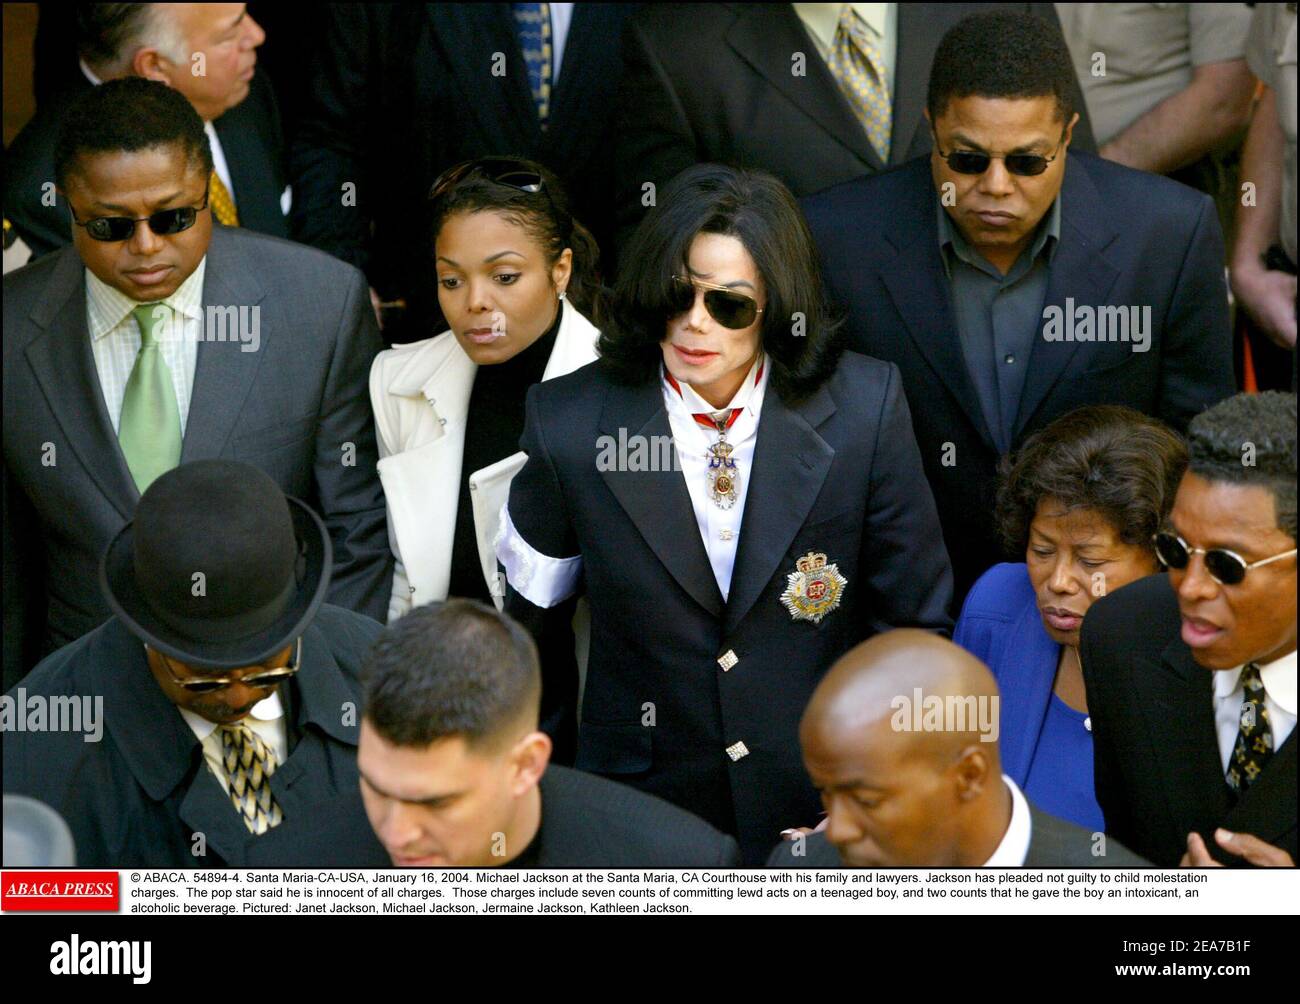 © ABACA. 54894-4. Santa Maria-CA-USA, January 16, 2004. Michael Jackson at the Santa Maria, CA Courthouse with his family and lawyers. Jackson has pleaded not guilty to child molestation charges. The pop star said he is innocent of all charges. Those charges include seven counts of committing lewd acts on a teenaged boy, and two counts that he gave the boy an intoxicant, an alcoholic beverage. Pictured: Janet Jackson, Michael Jackson, Jermaine Jackson, Kathleen Jackson. Stock Photo